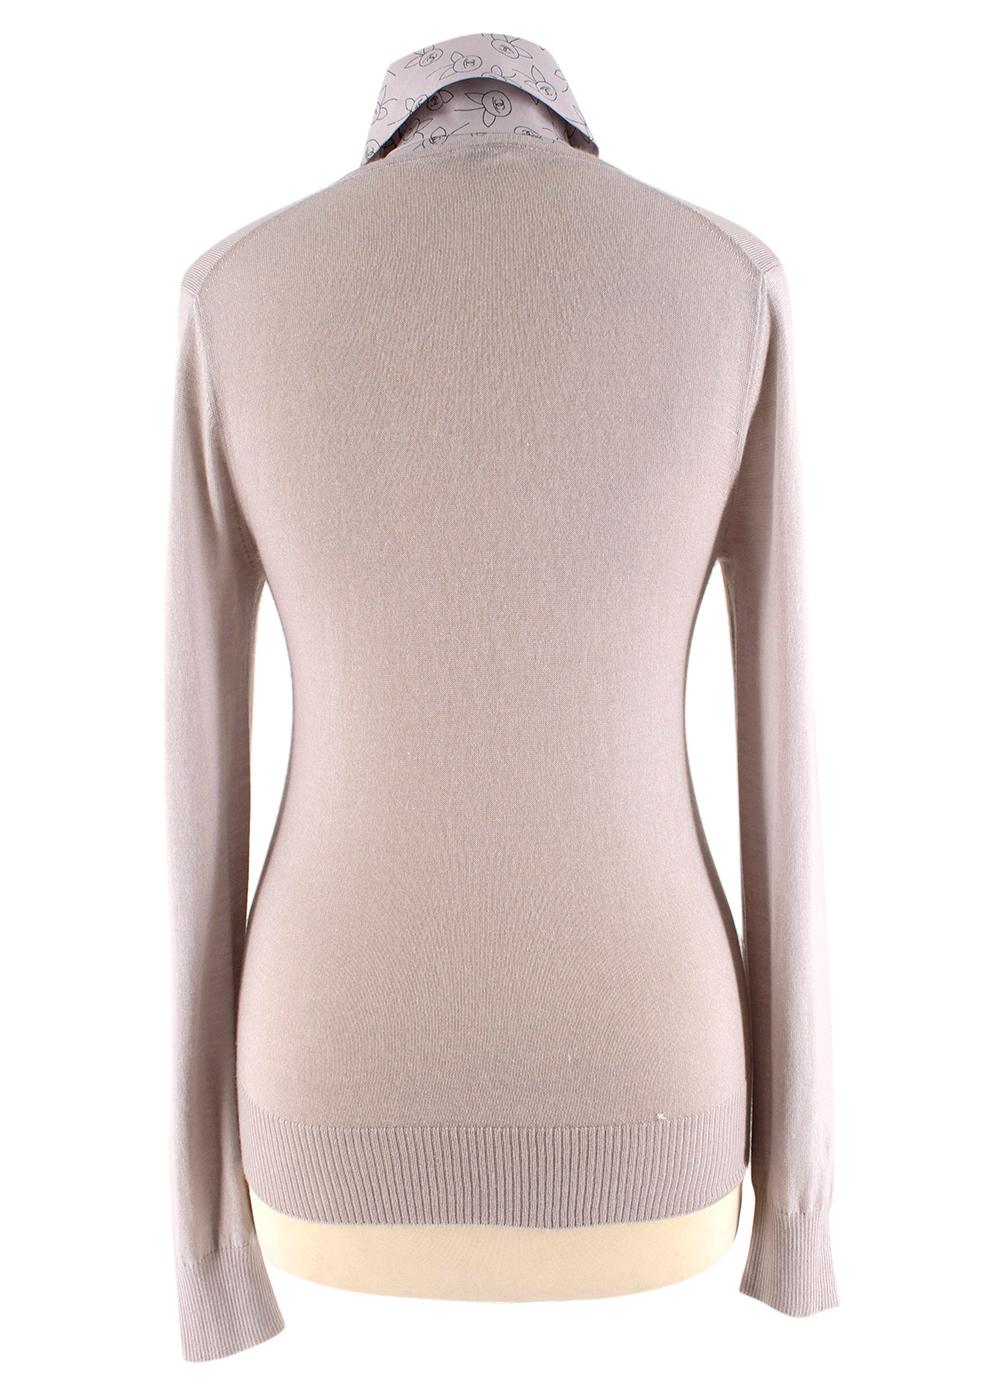 Gray Chanel Taupe Collared Cashmere-Blend Jumper - Size US 10 For Sale